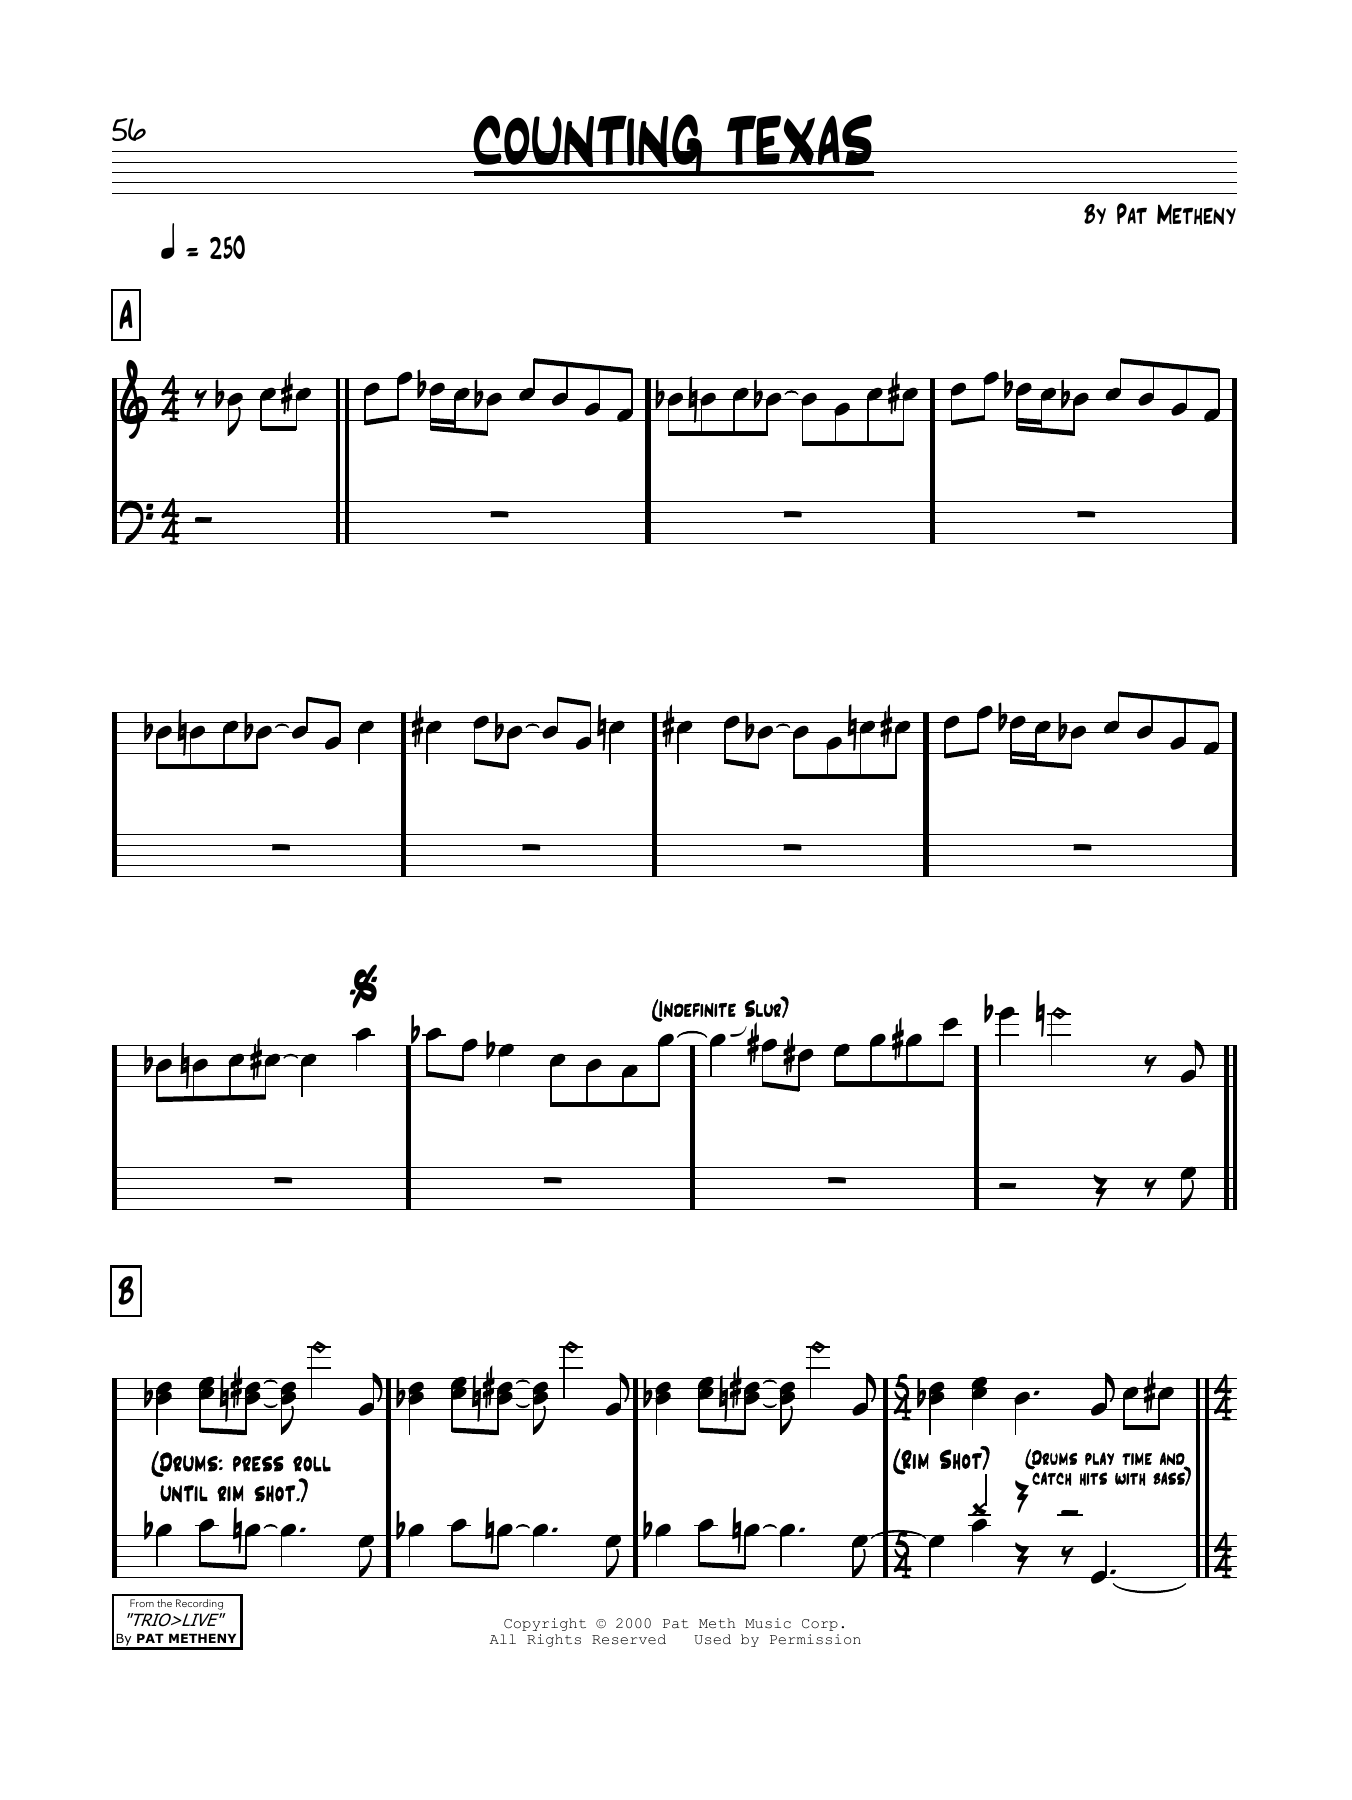 Download Pat Metheny Counting Texas Sheet Music